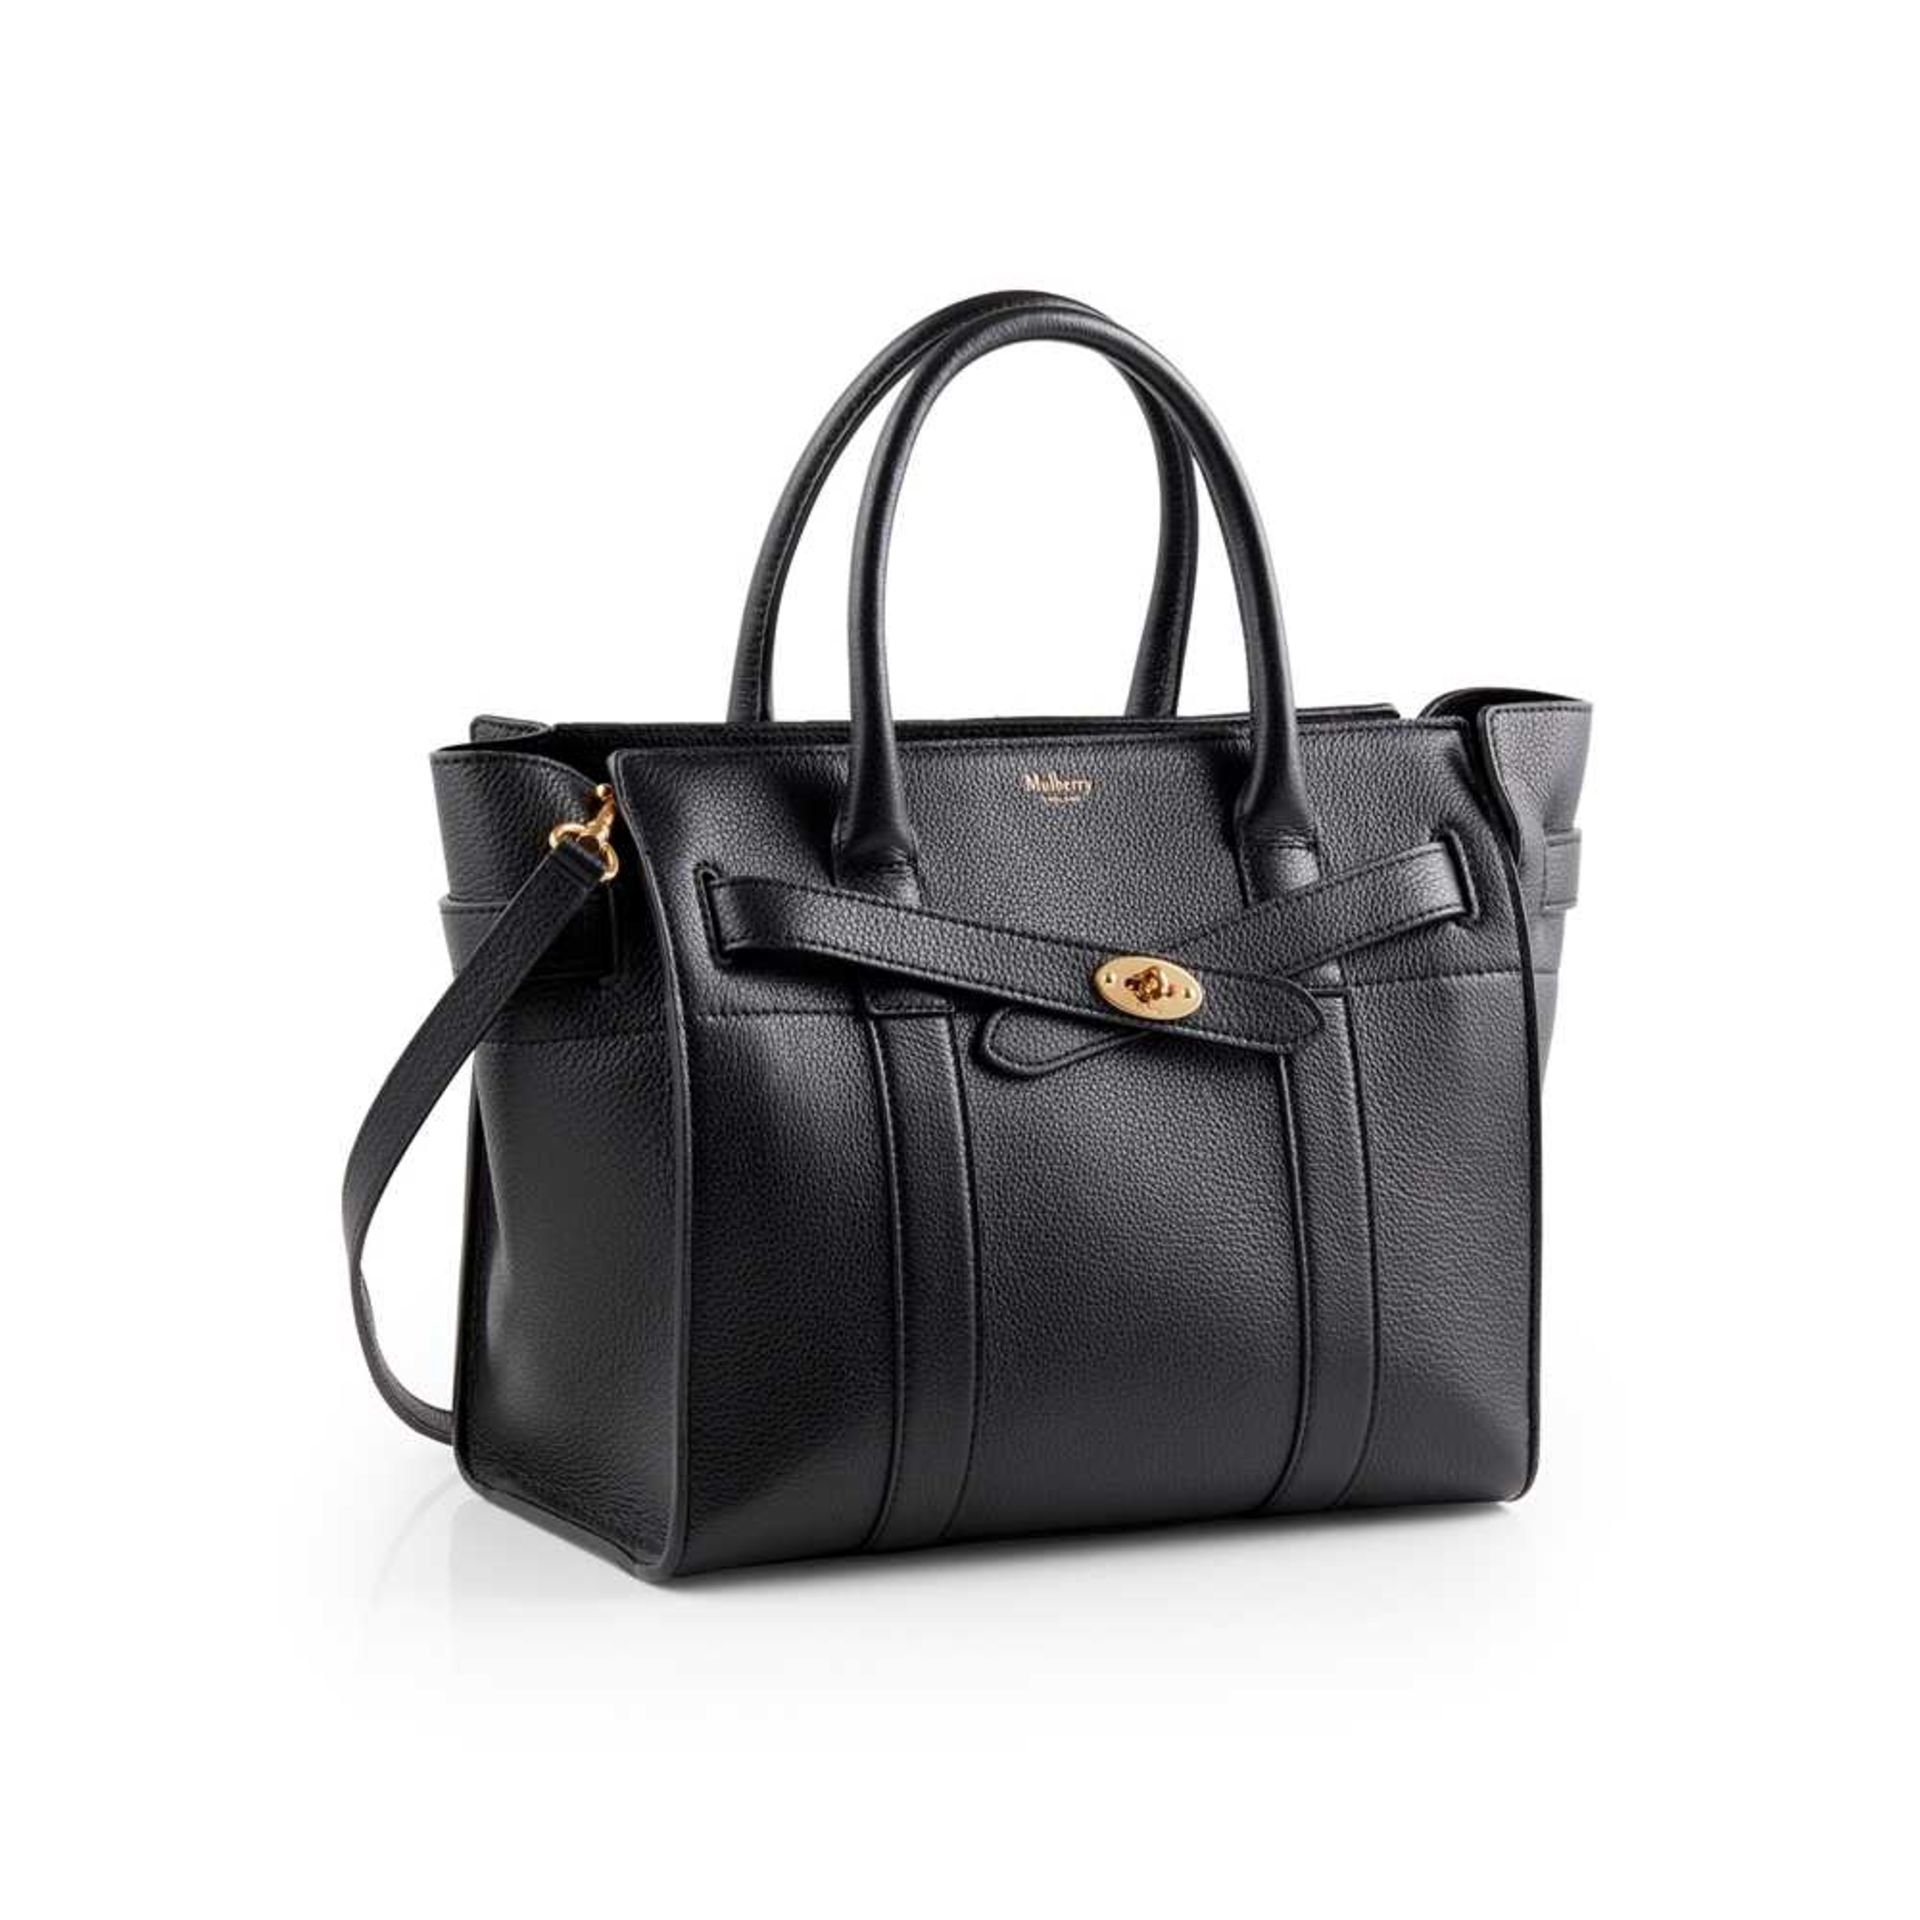 A black leather Zipped Bayswater handbag, Mulberry - Image 2 of 4